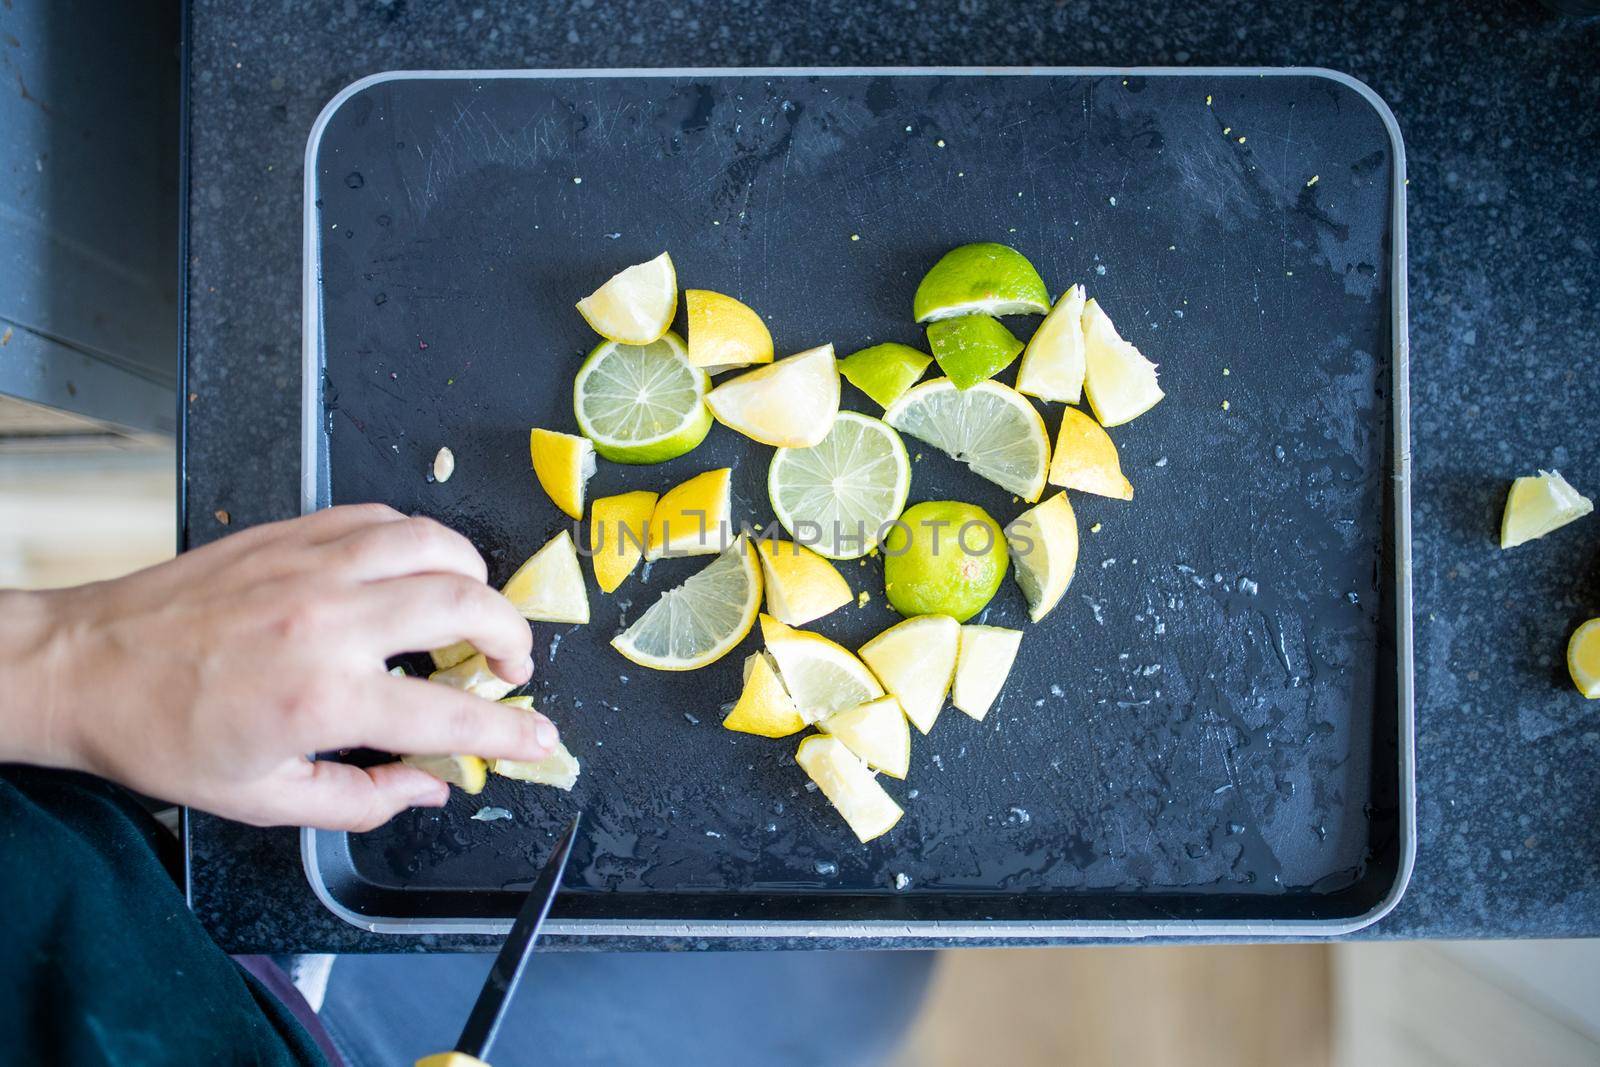 Top view of female hands carefully slicing lemons and limes on black tray. Woman cutting citric fruit into small pieces forming a heart. Citrus drink preparation